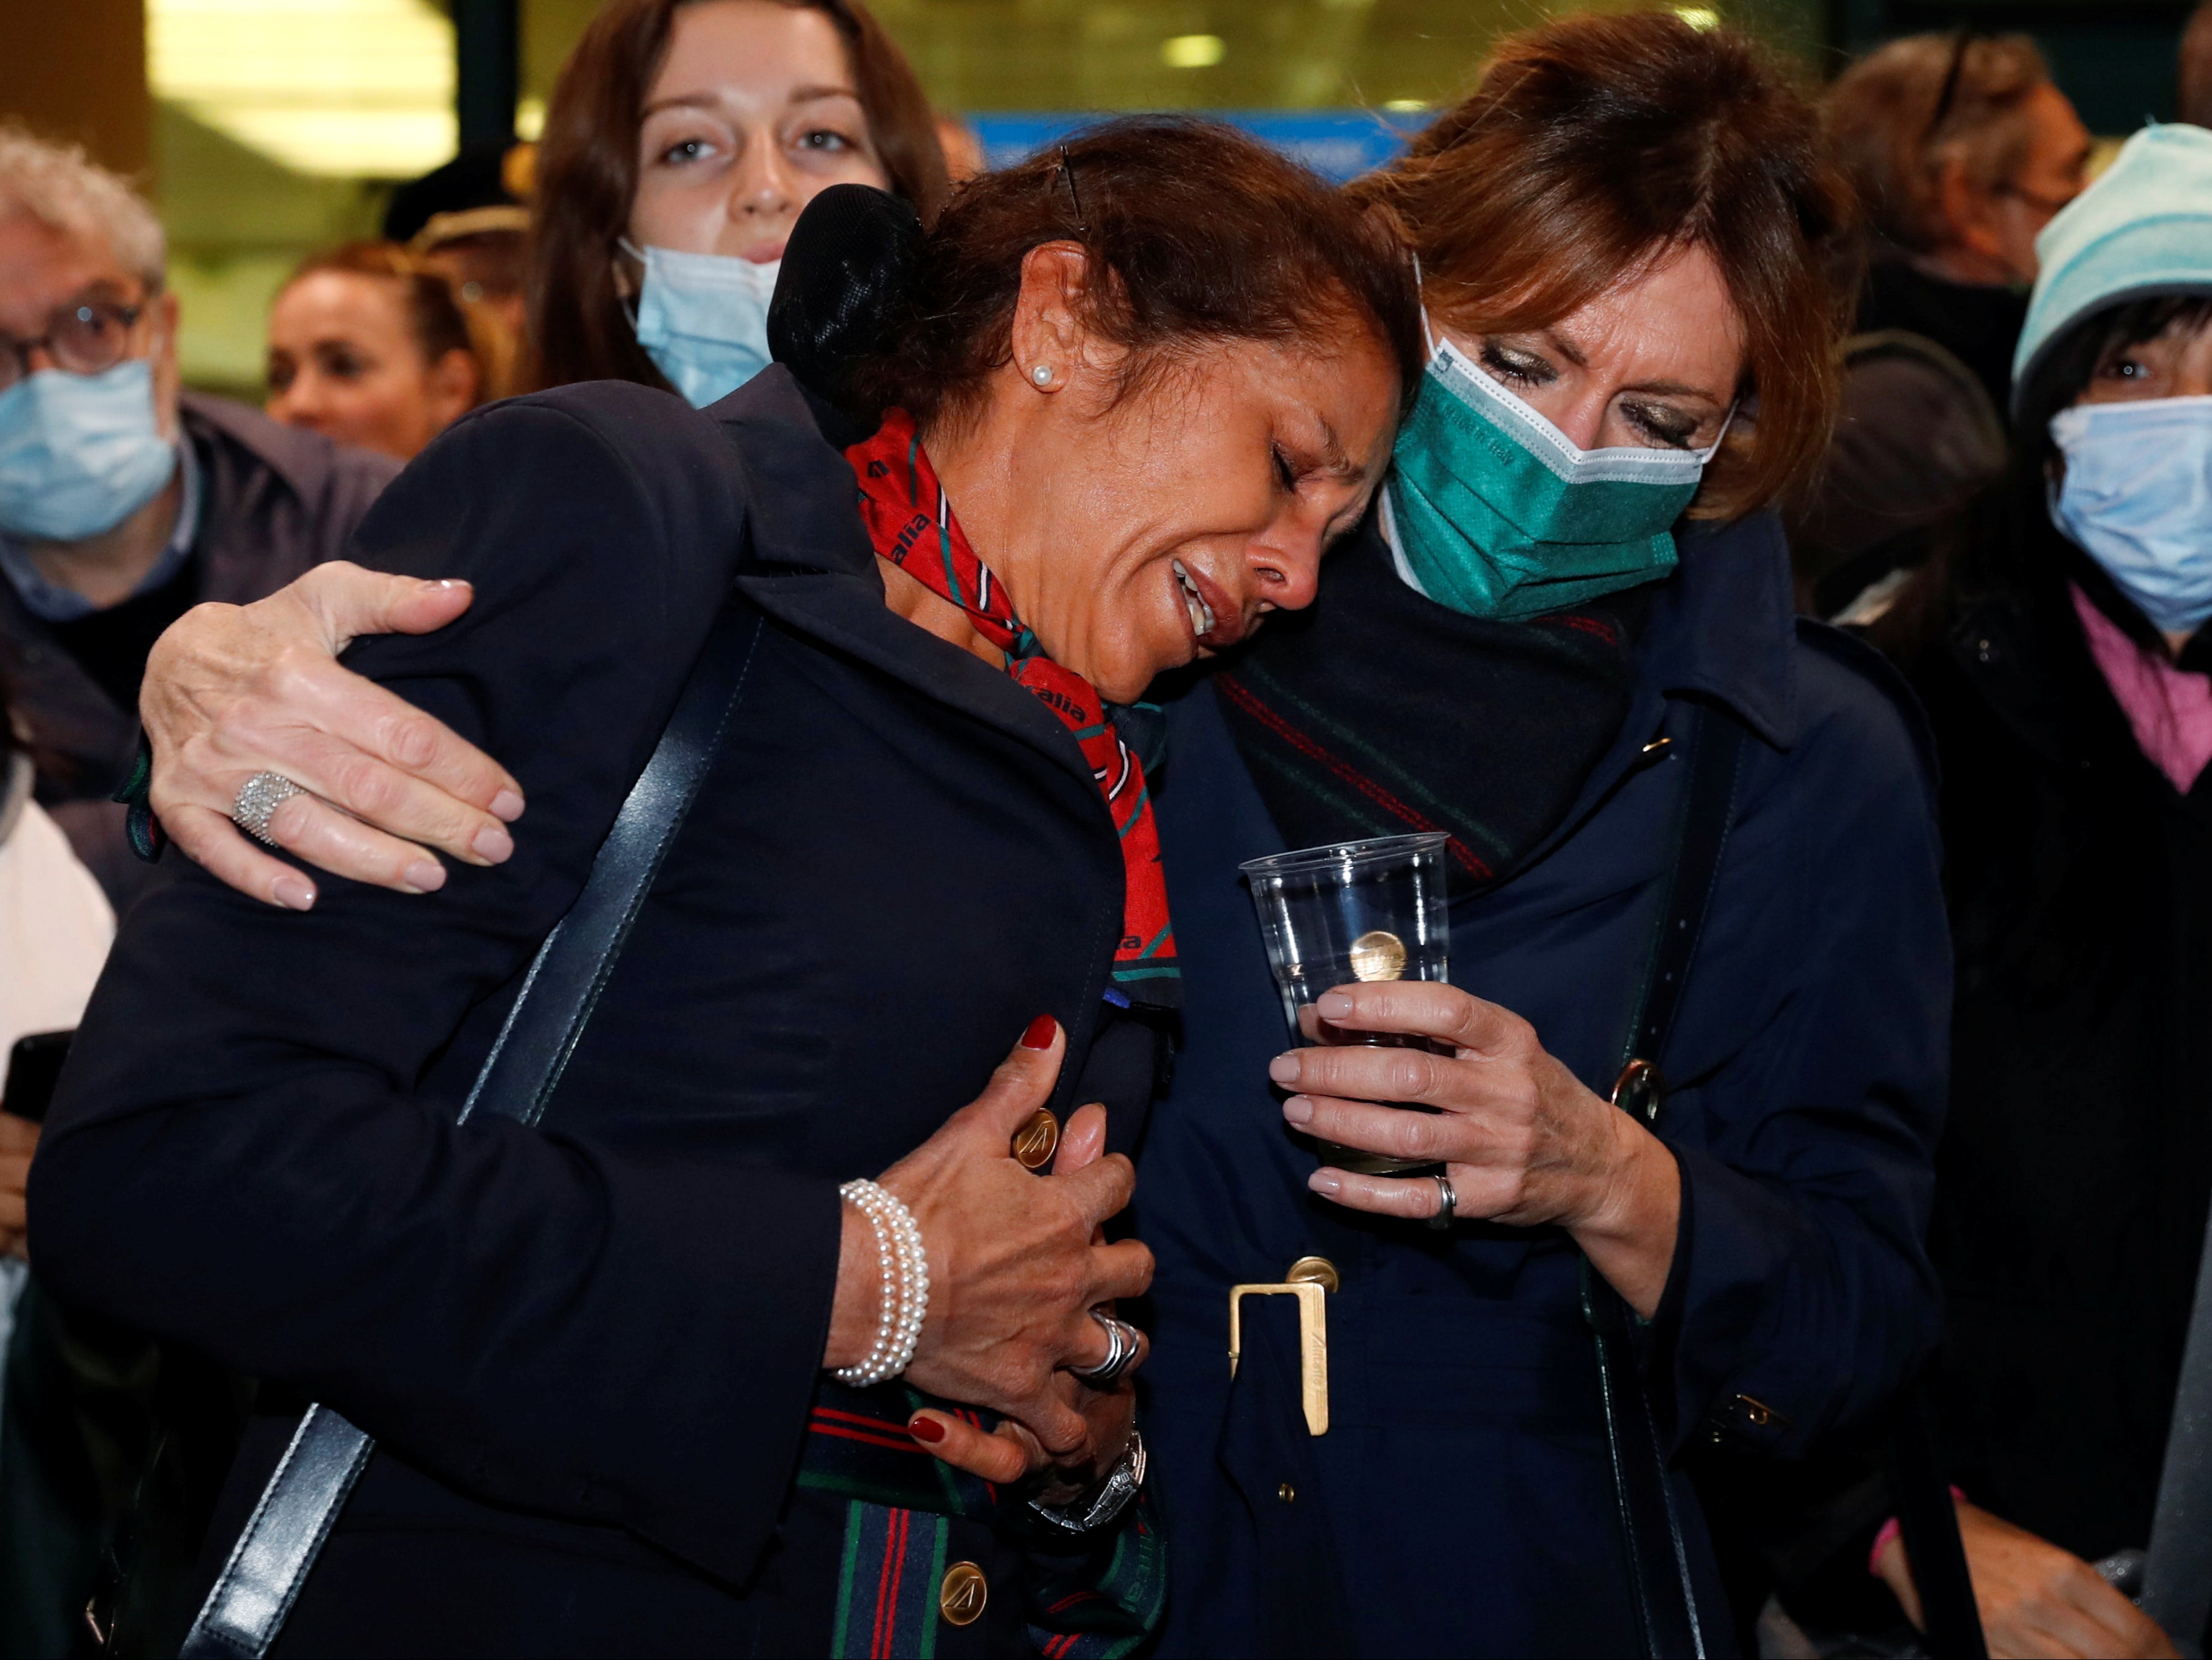 Alitalia workers after its last ever flight landed in Rome Fiumicino